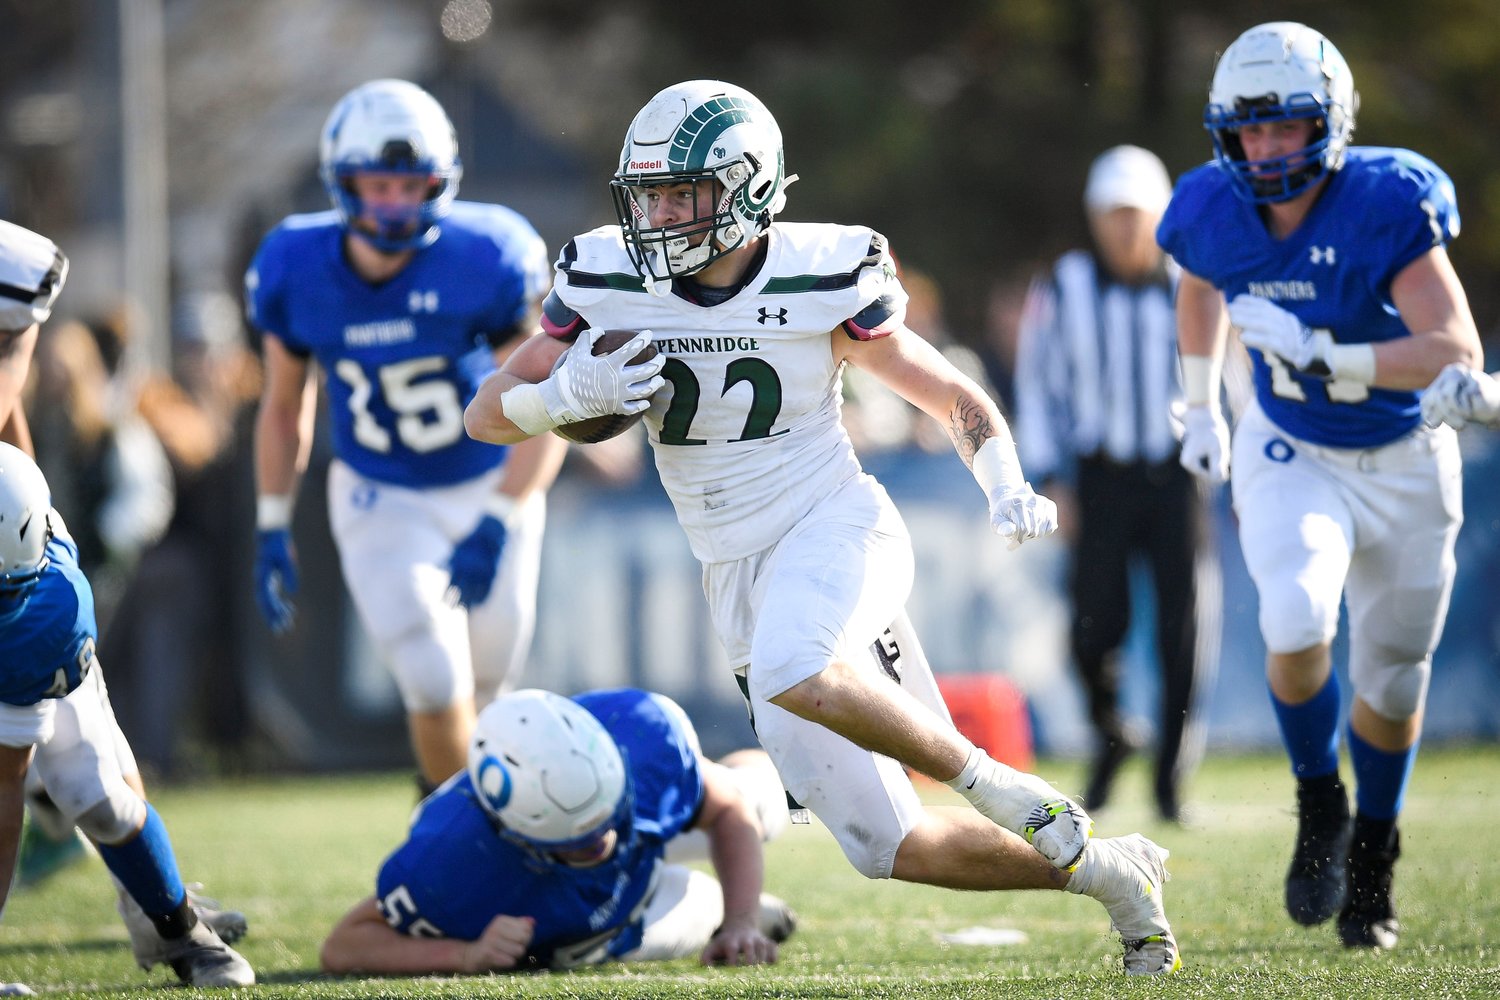 Pennridge running back Brennan Fisher gashes through for his biggest run of the day.